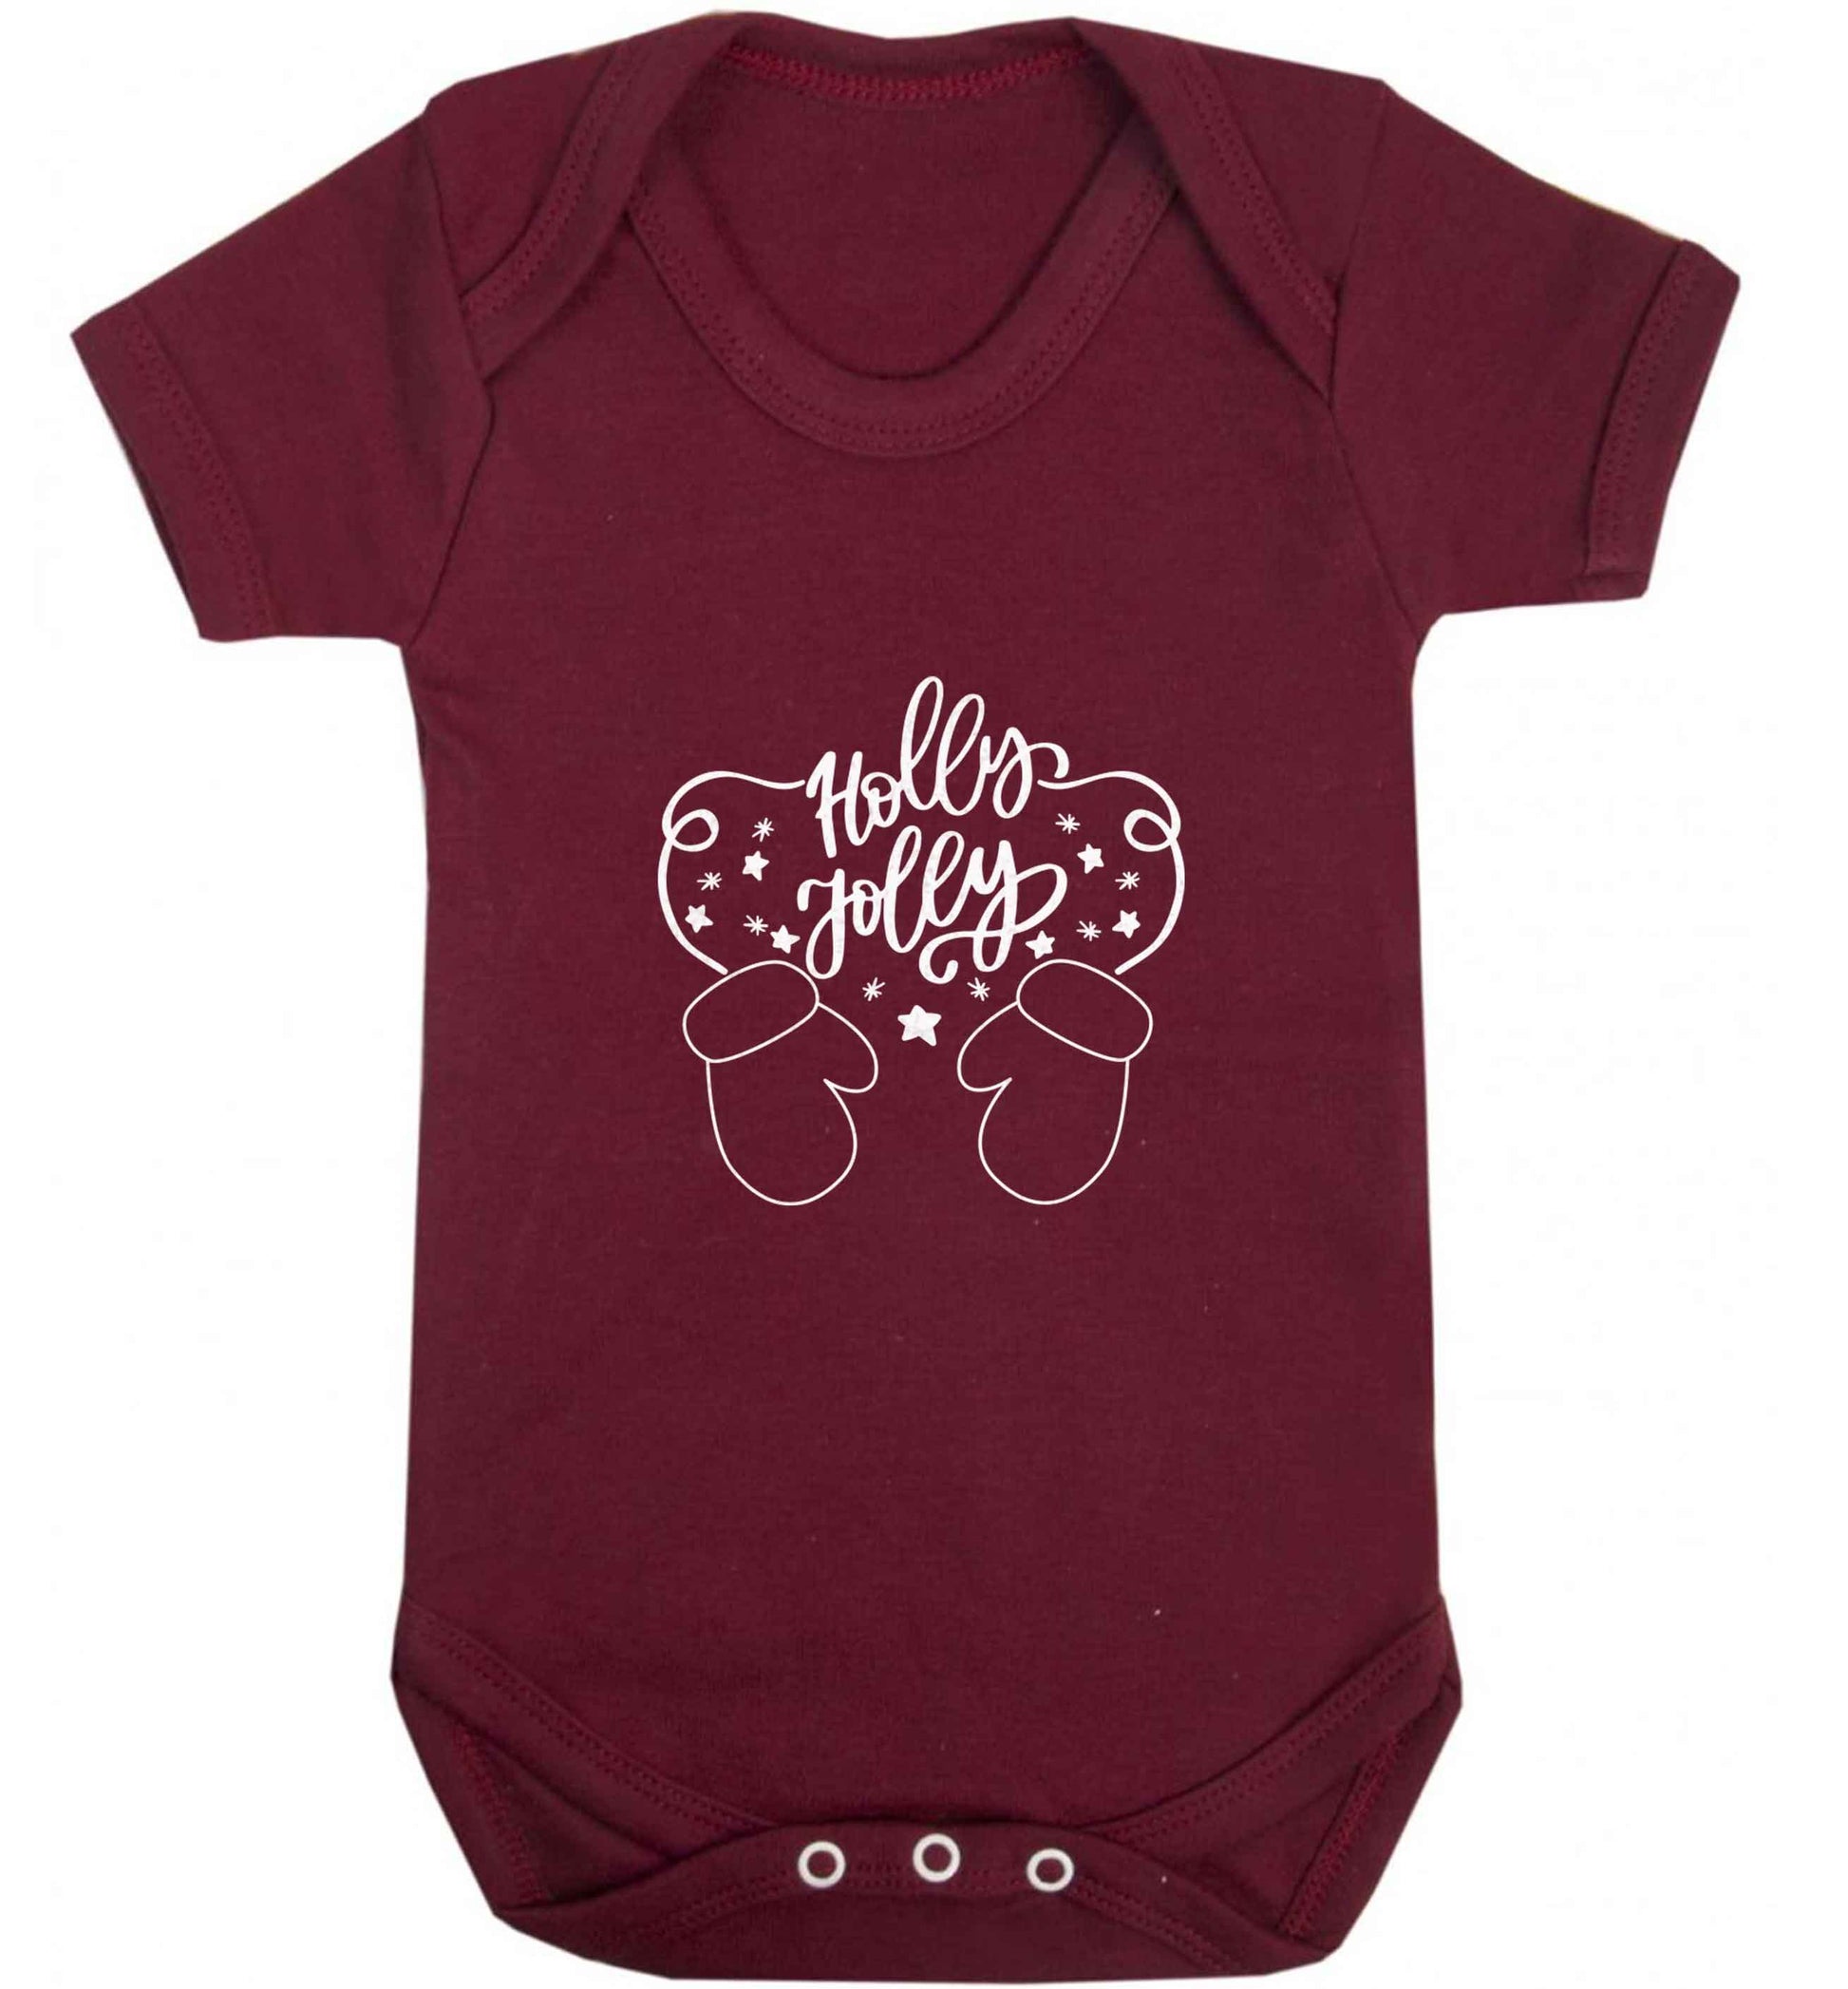 Holly jolly baby vest maroon 18-24 months